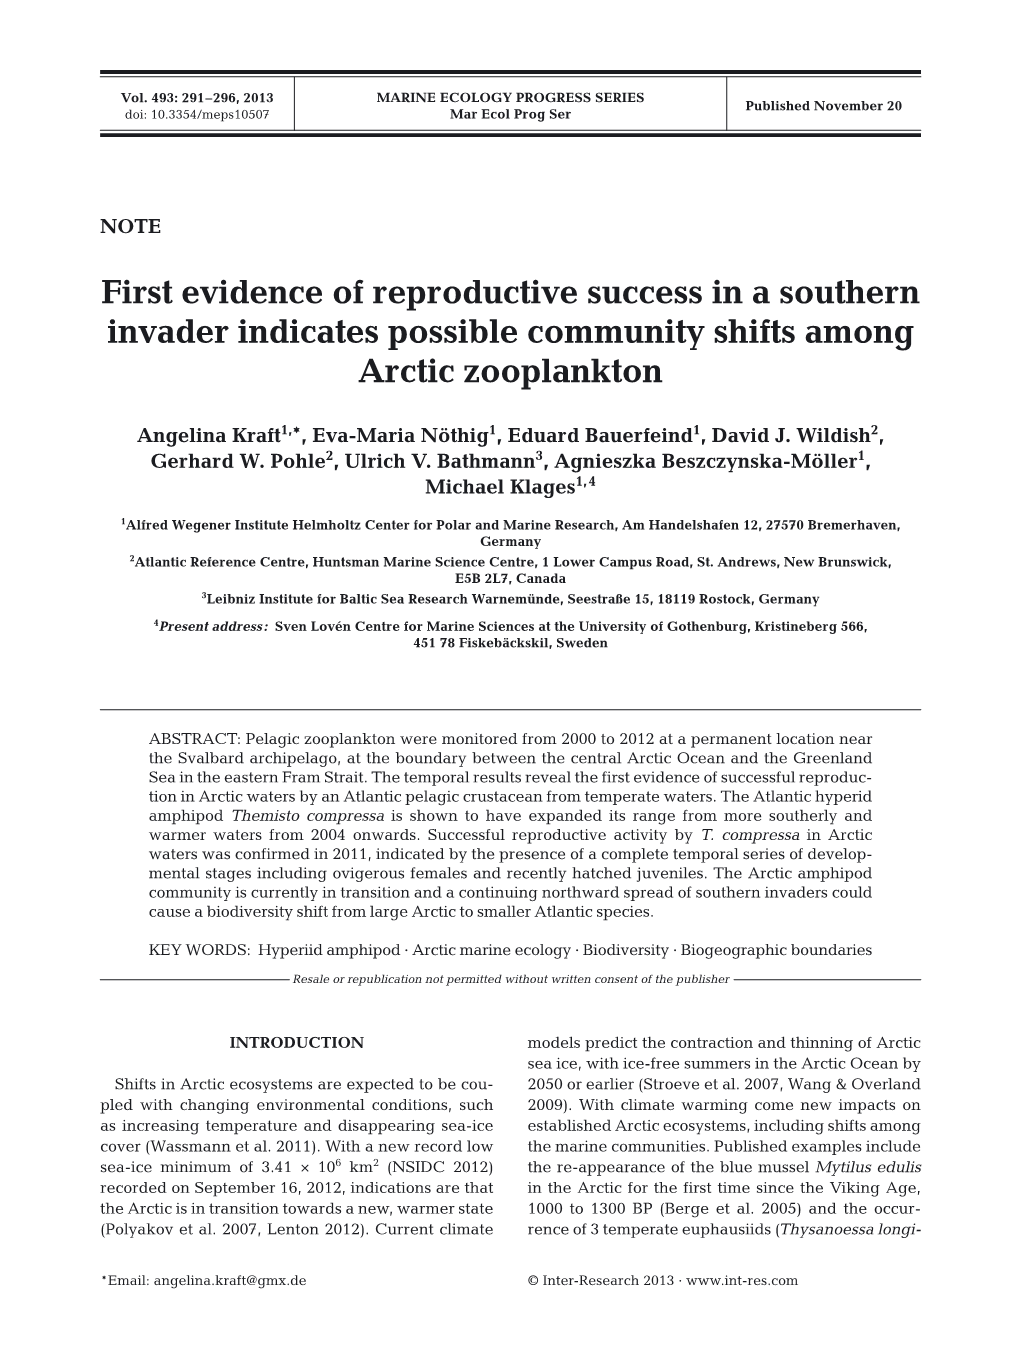 First Evidence of Reproductive Success in a Southern Invader Indicates Possible Community Shifts Among Arctic Zooplankton